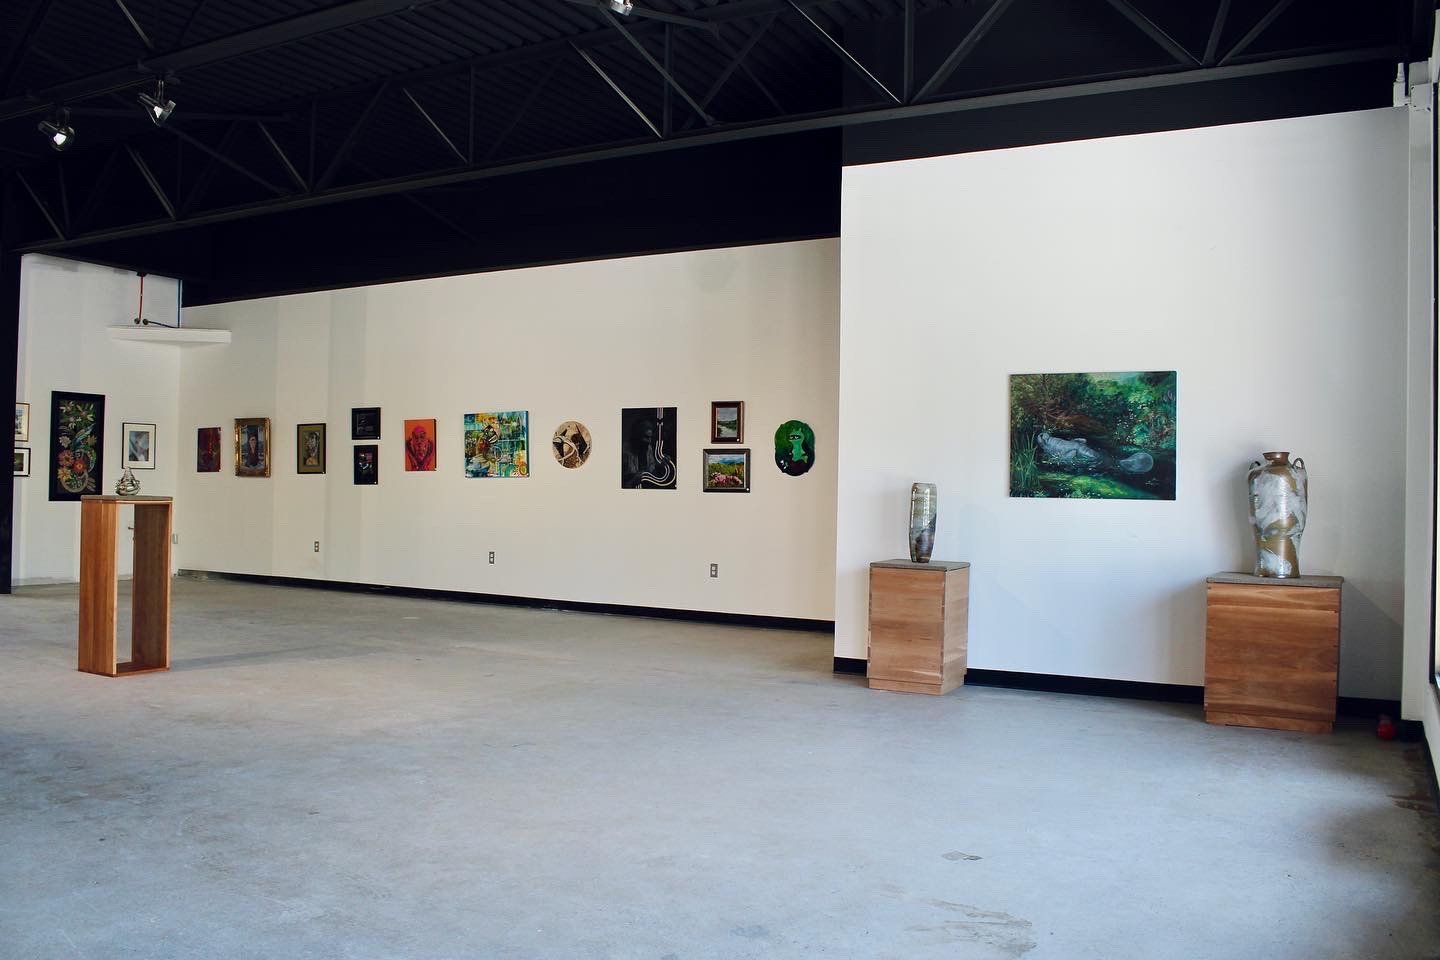 Artwork that is part of the Rome Regional 2022 art show is on display at 252 W. Dominick St., Rome.